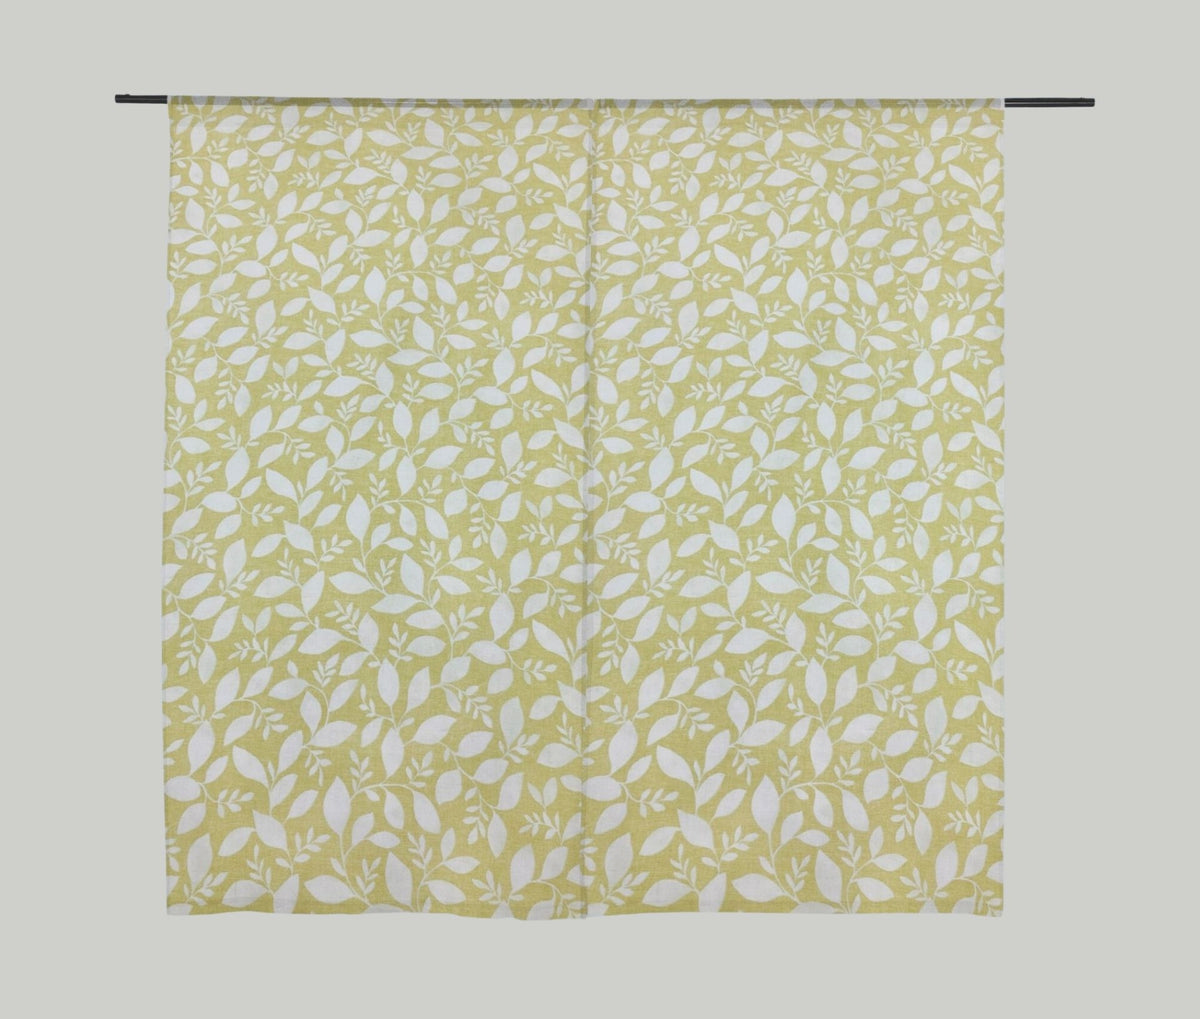 All Over White Vines on Yellow/Beige Panama Fabric